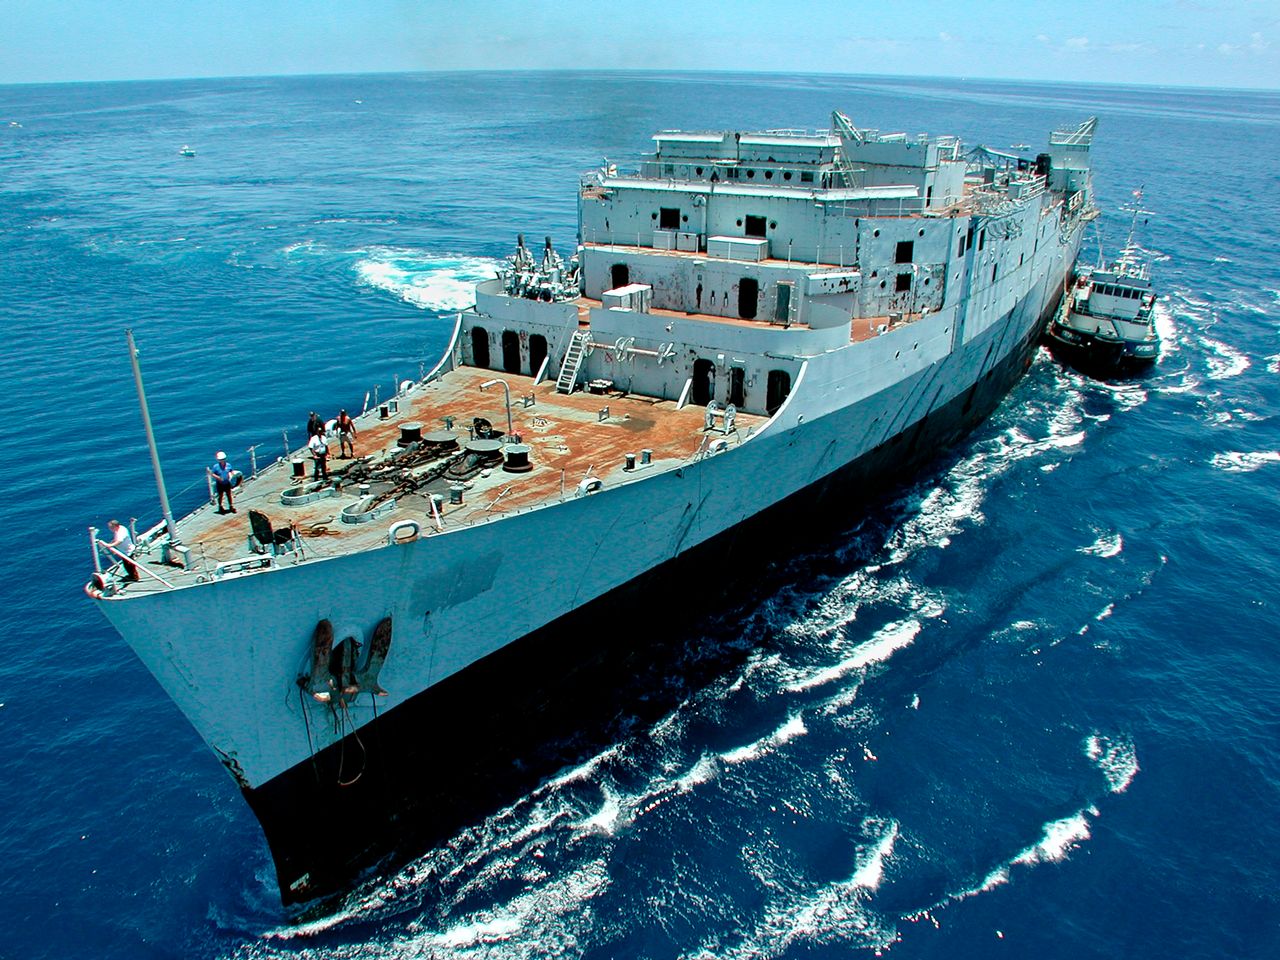 Spiegel Grove arrives from Virginia, where it spent years in a U.S. Navy mothball fleet after it was retired. 